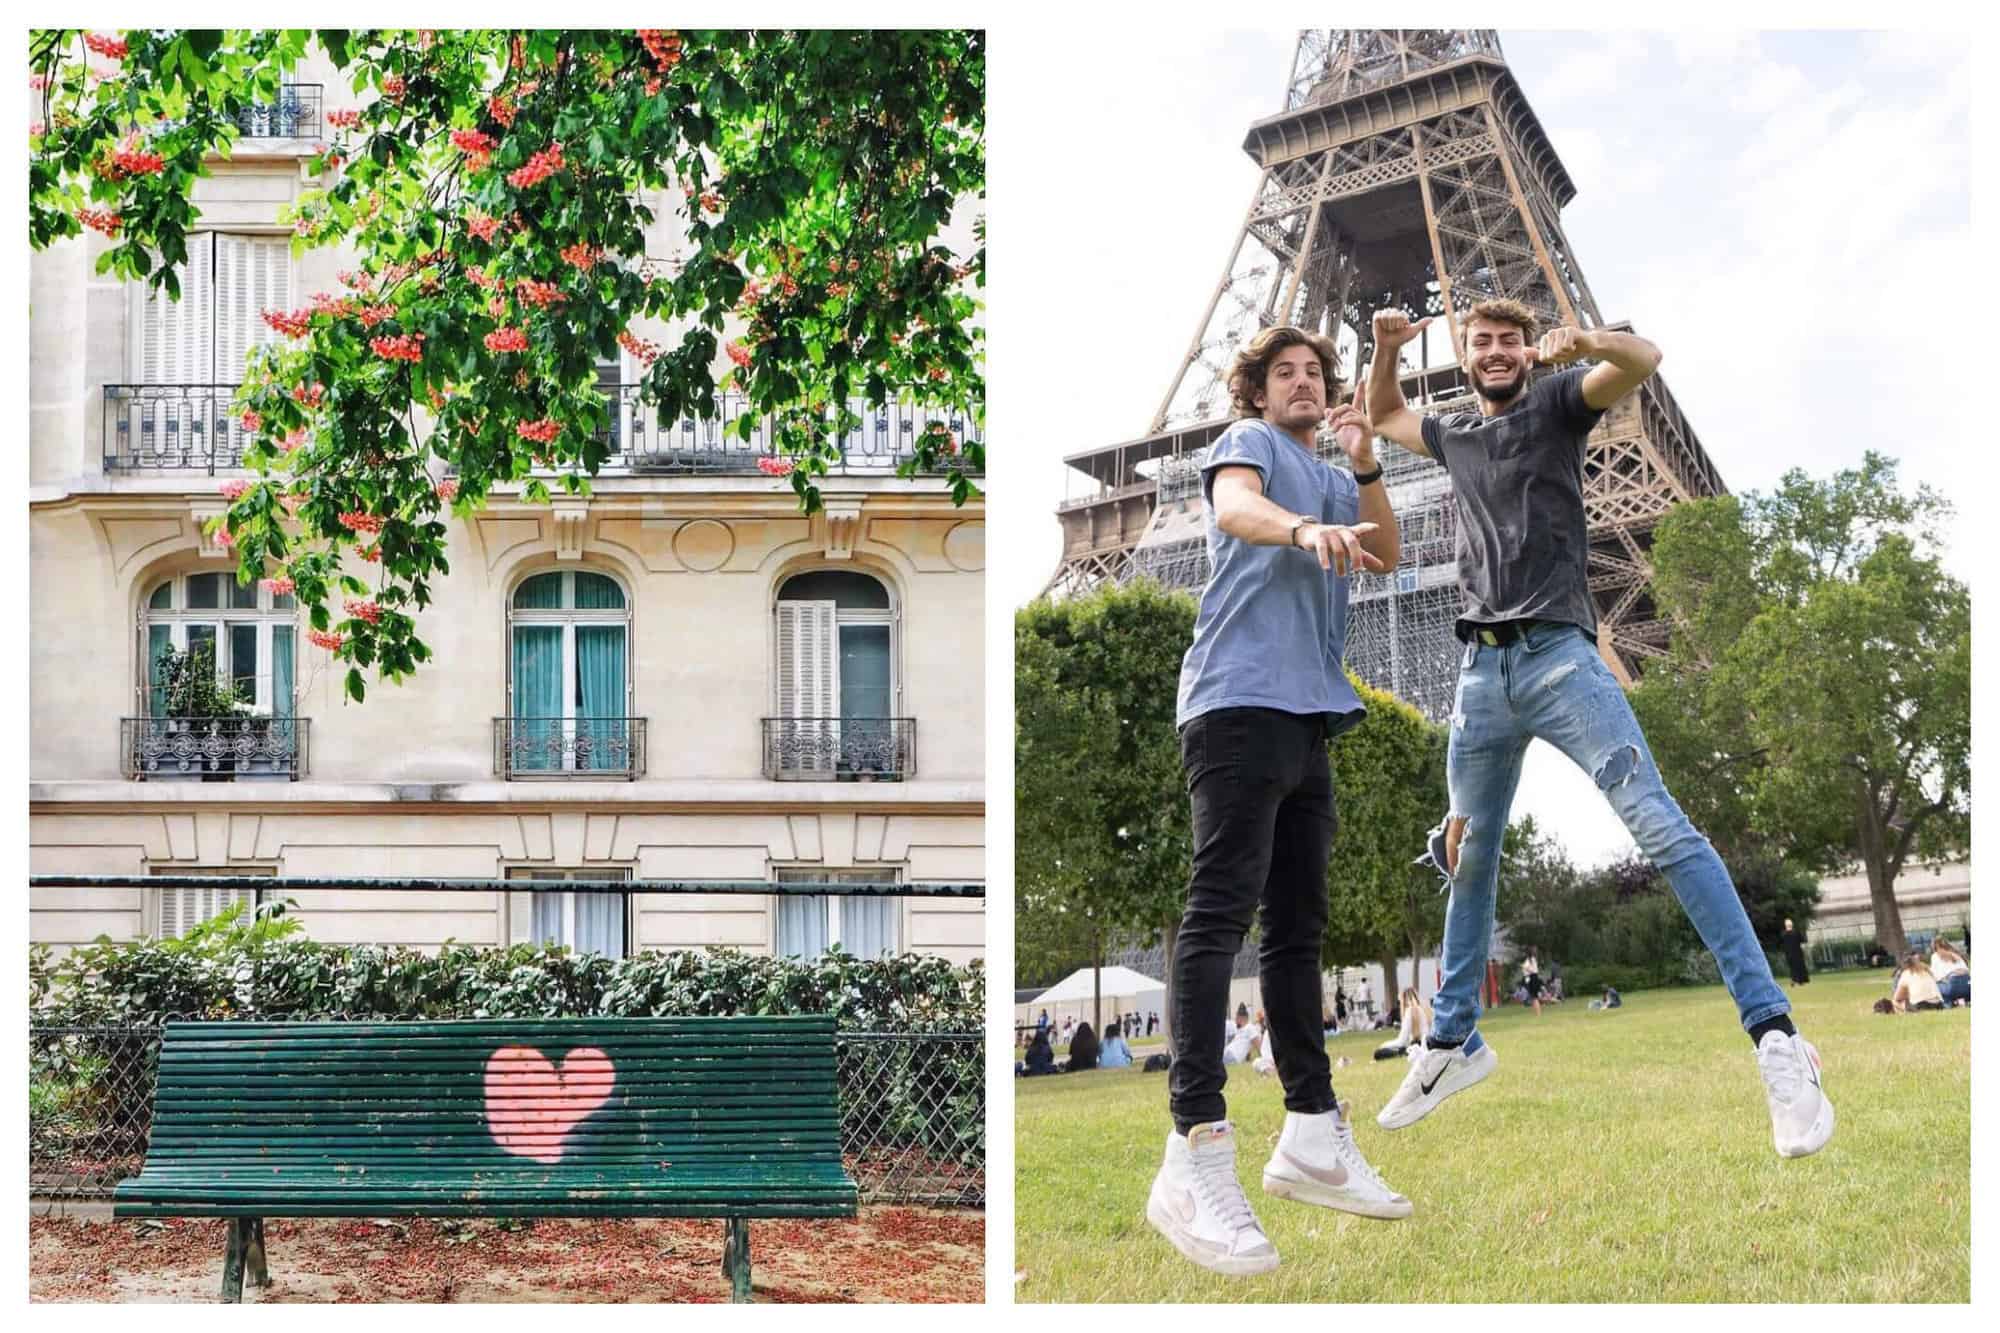 left: a green coloured nech with a pink heart graffitied on it. behind it, is a cream coloured Parisian building and trees with pink flowers. 
right: alex and tom from the TikTok account Frenchies jumping and laughing in front of the Eiffel Tower, Paris. 